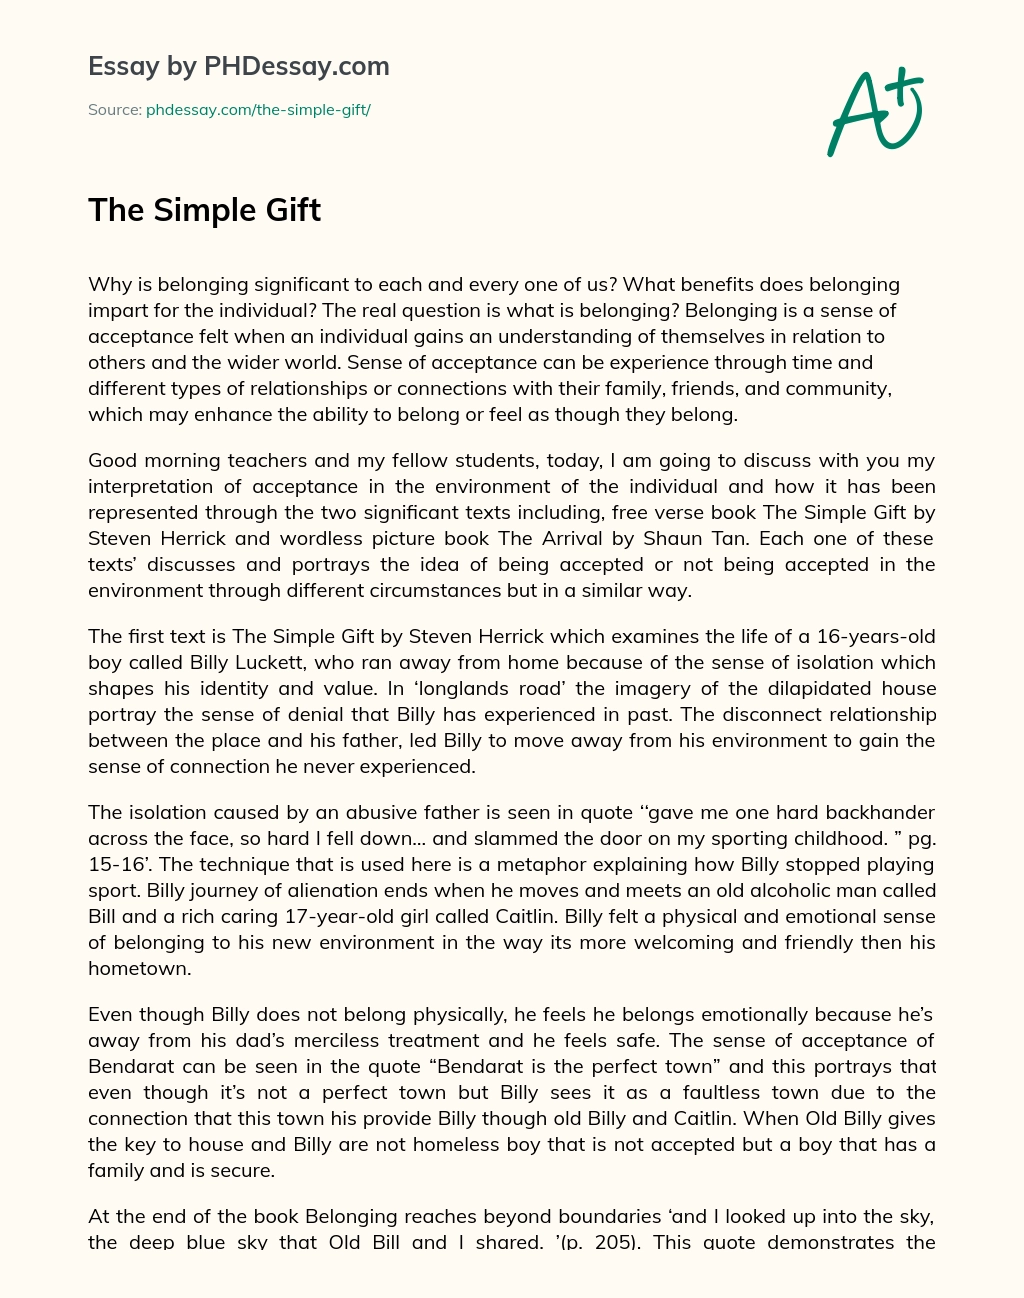 The Simple Gift essay